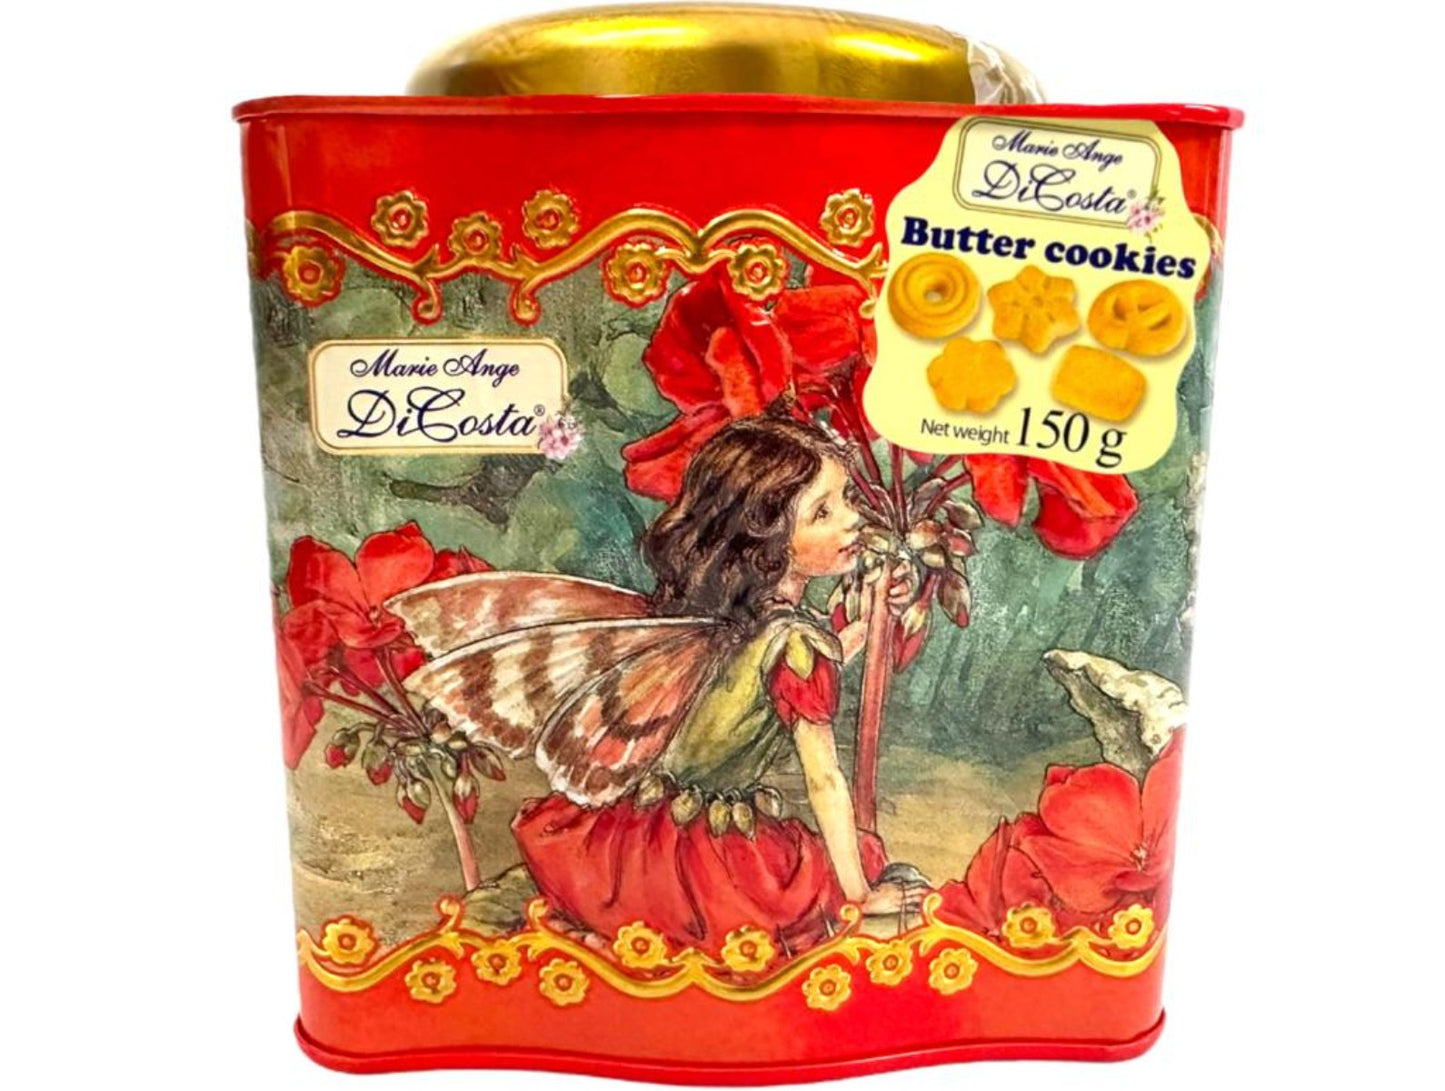 Marie Ange di Costa Flower Fairy Italian Butter Cookies—Il Boccetta in Red 150g